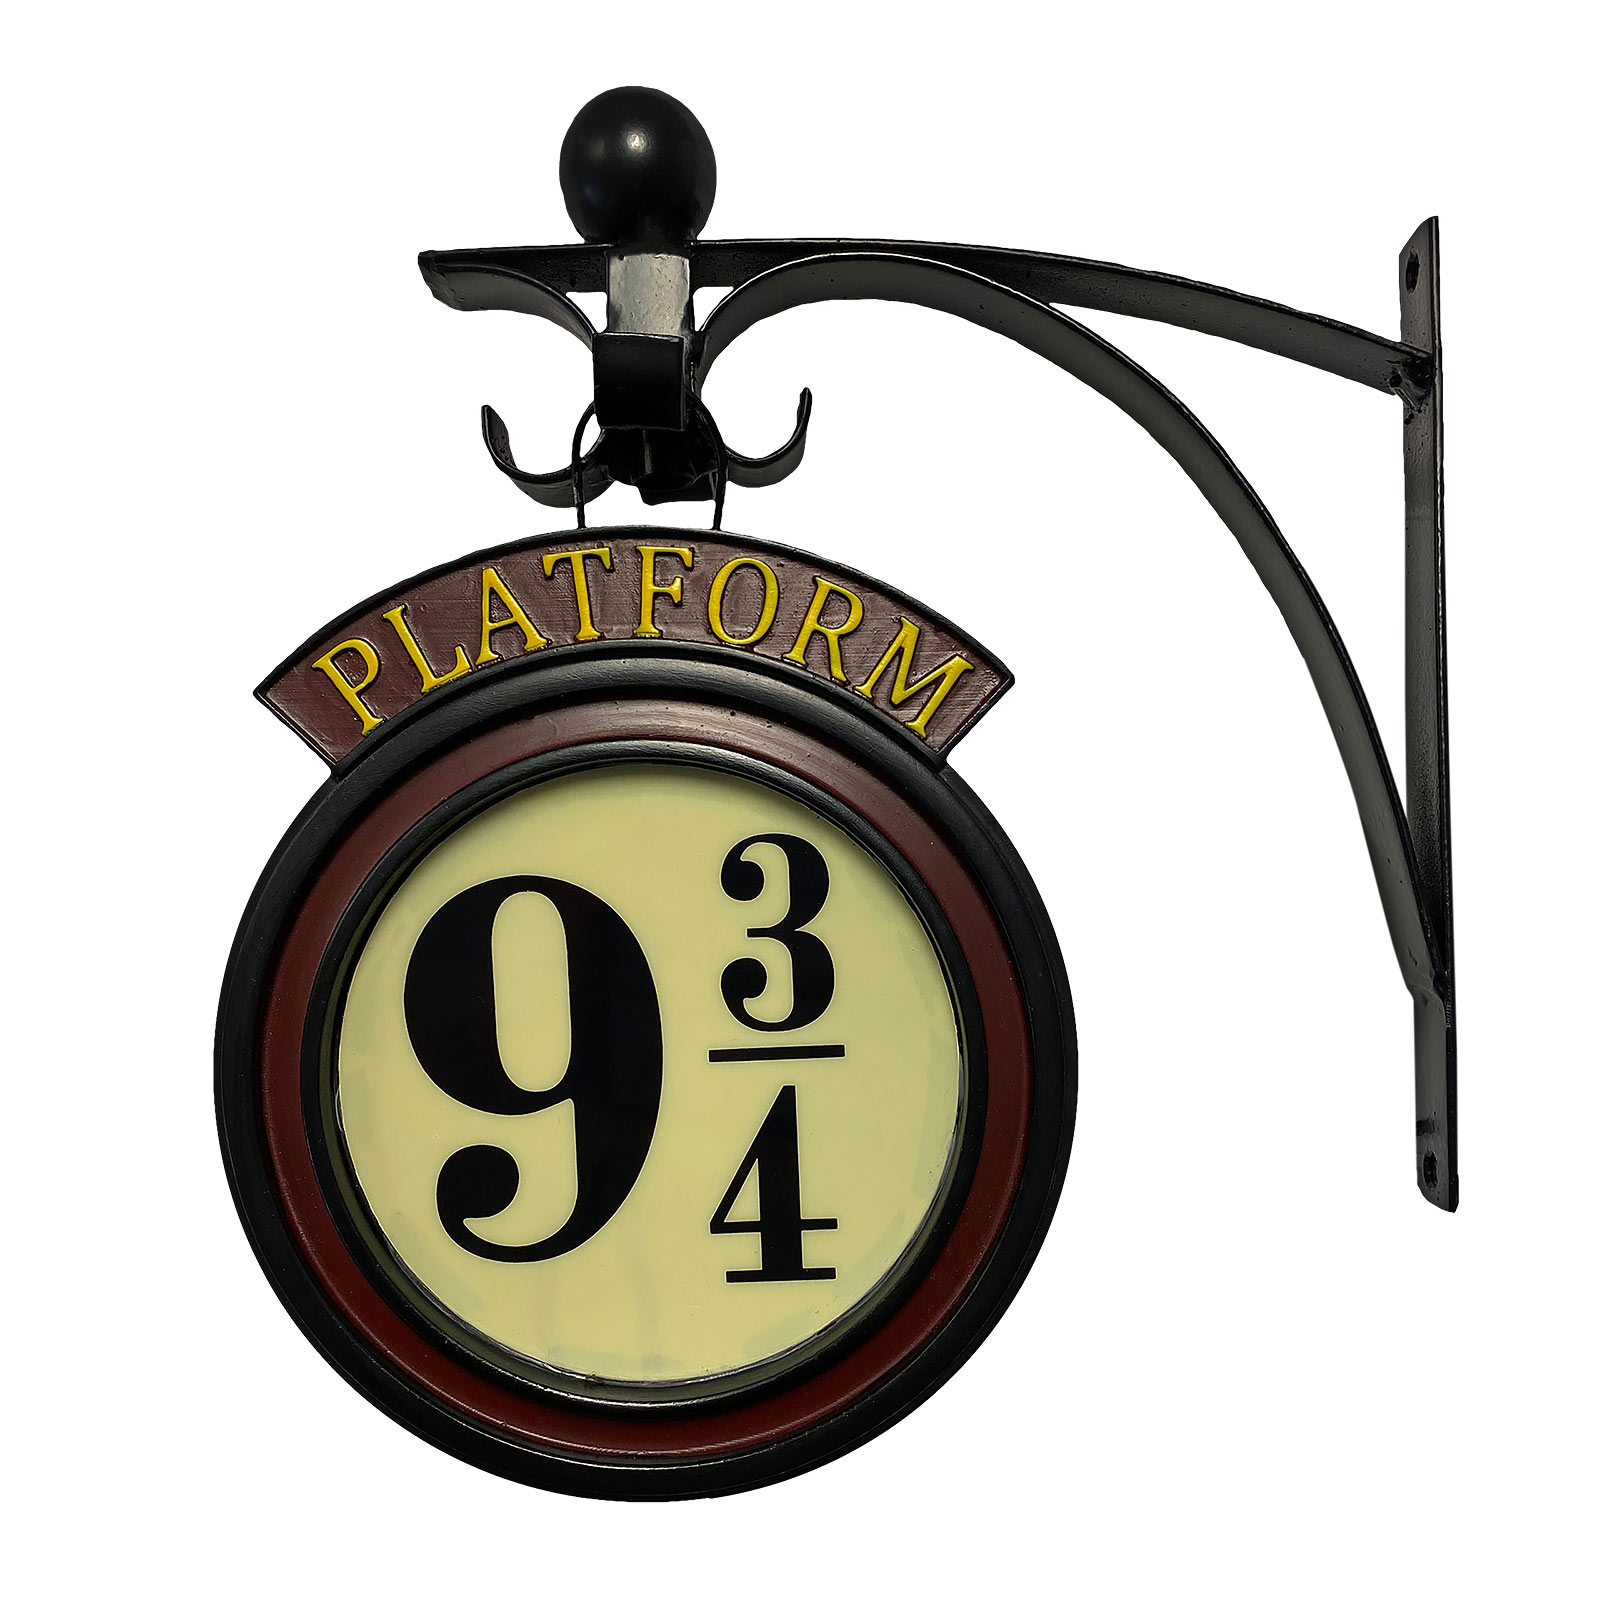 Harry Potter - Track 9 3/4 wall sign with light function